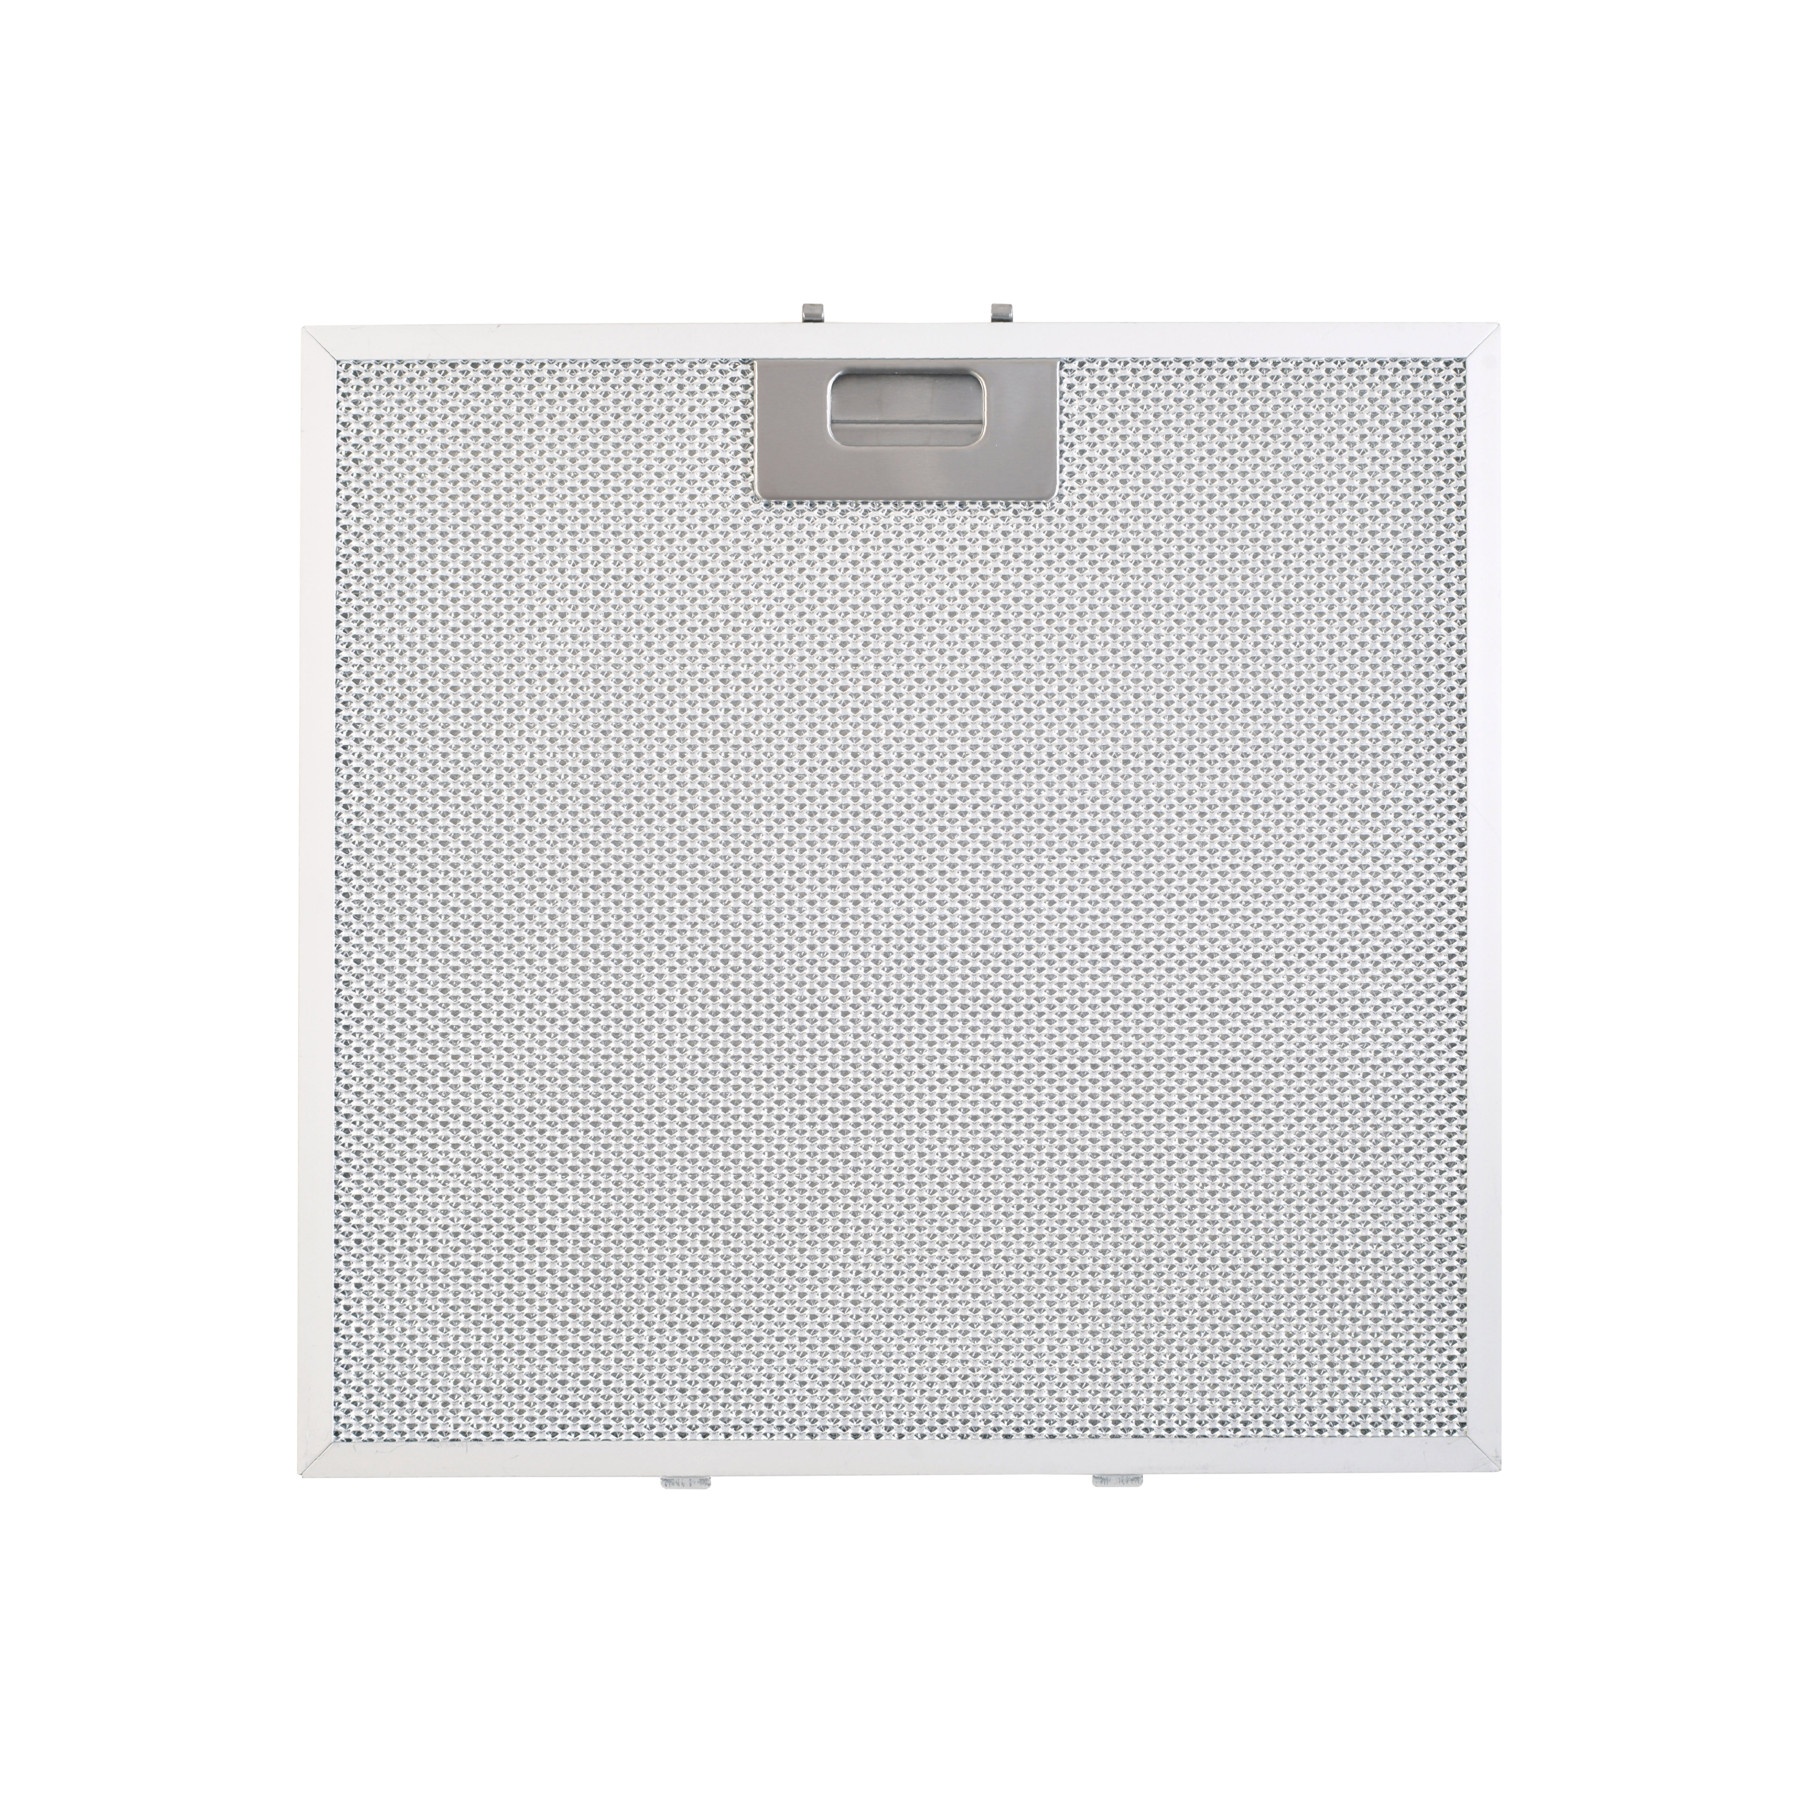 Broan-NuTone® / BEST® Genuine Replacement Aluminum Filter for Range Hoods, 13-3/16" x 12-5/8", Fits Select Models, (2-Pa